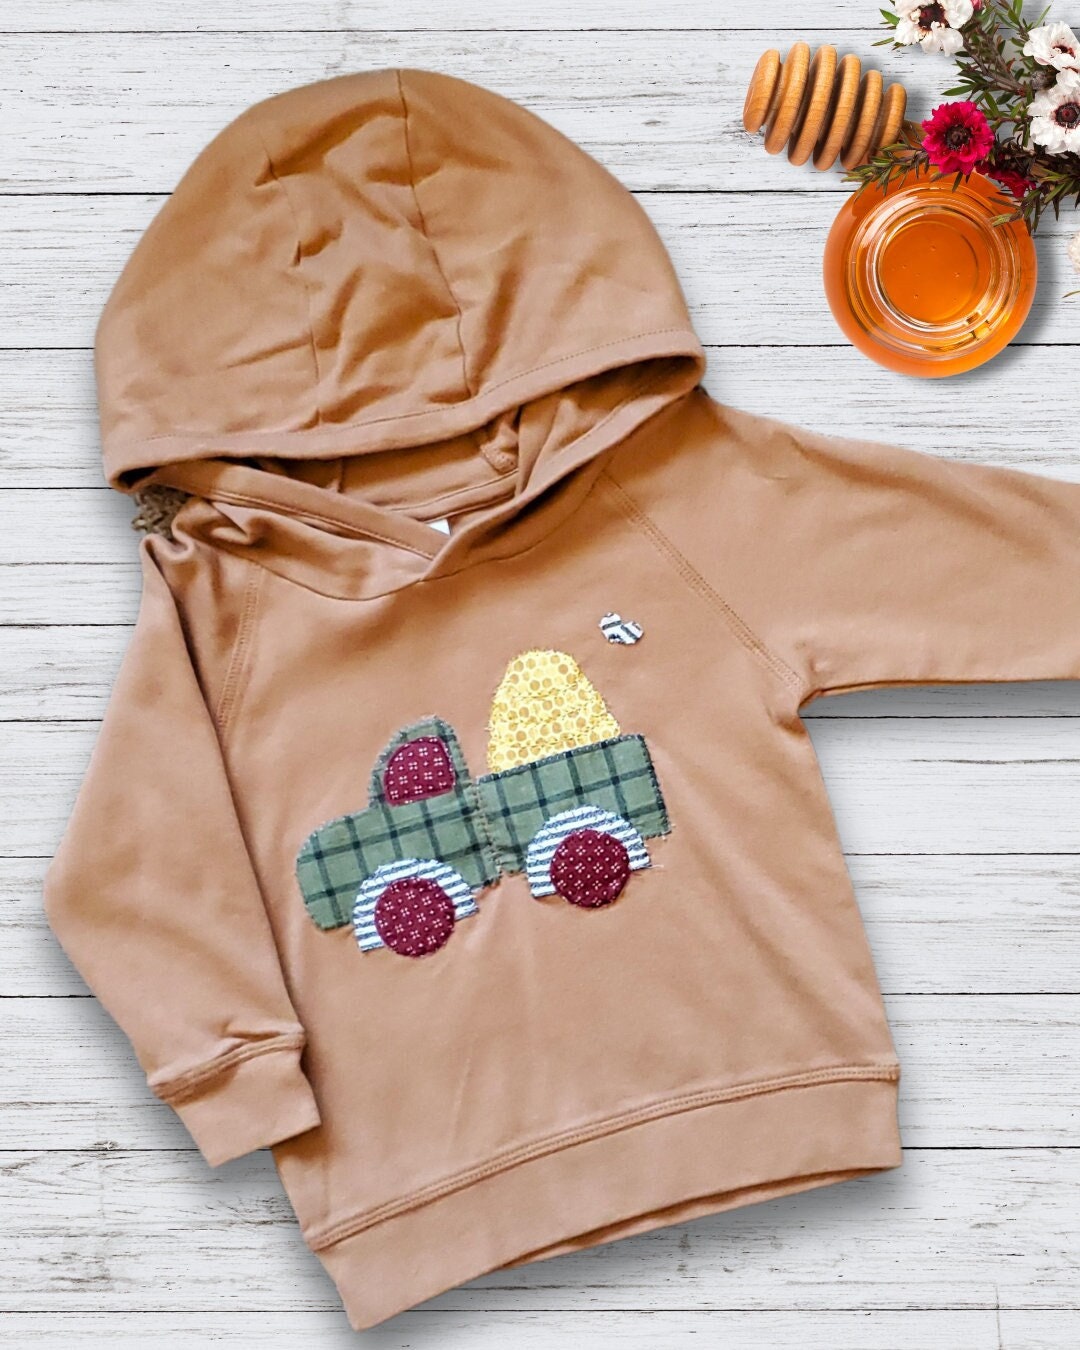 Boutique Baby by Jess - LV inspired bummies + bow! Love it! • • •  #babybummies #baby #babybloomers #babyfashion #babyclothes #babyboutique  #boutiquebabybyjess #babygirl #sisters #pumpkin #fall #pumpkinclothes  #sisterpictures #siblingphot